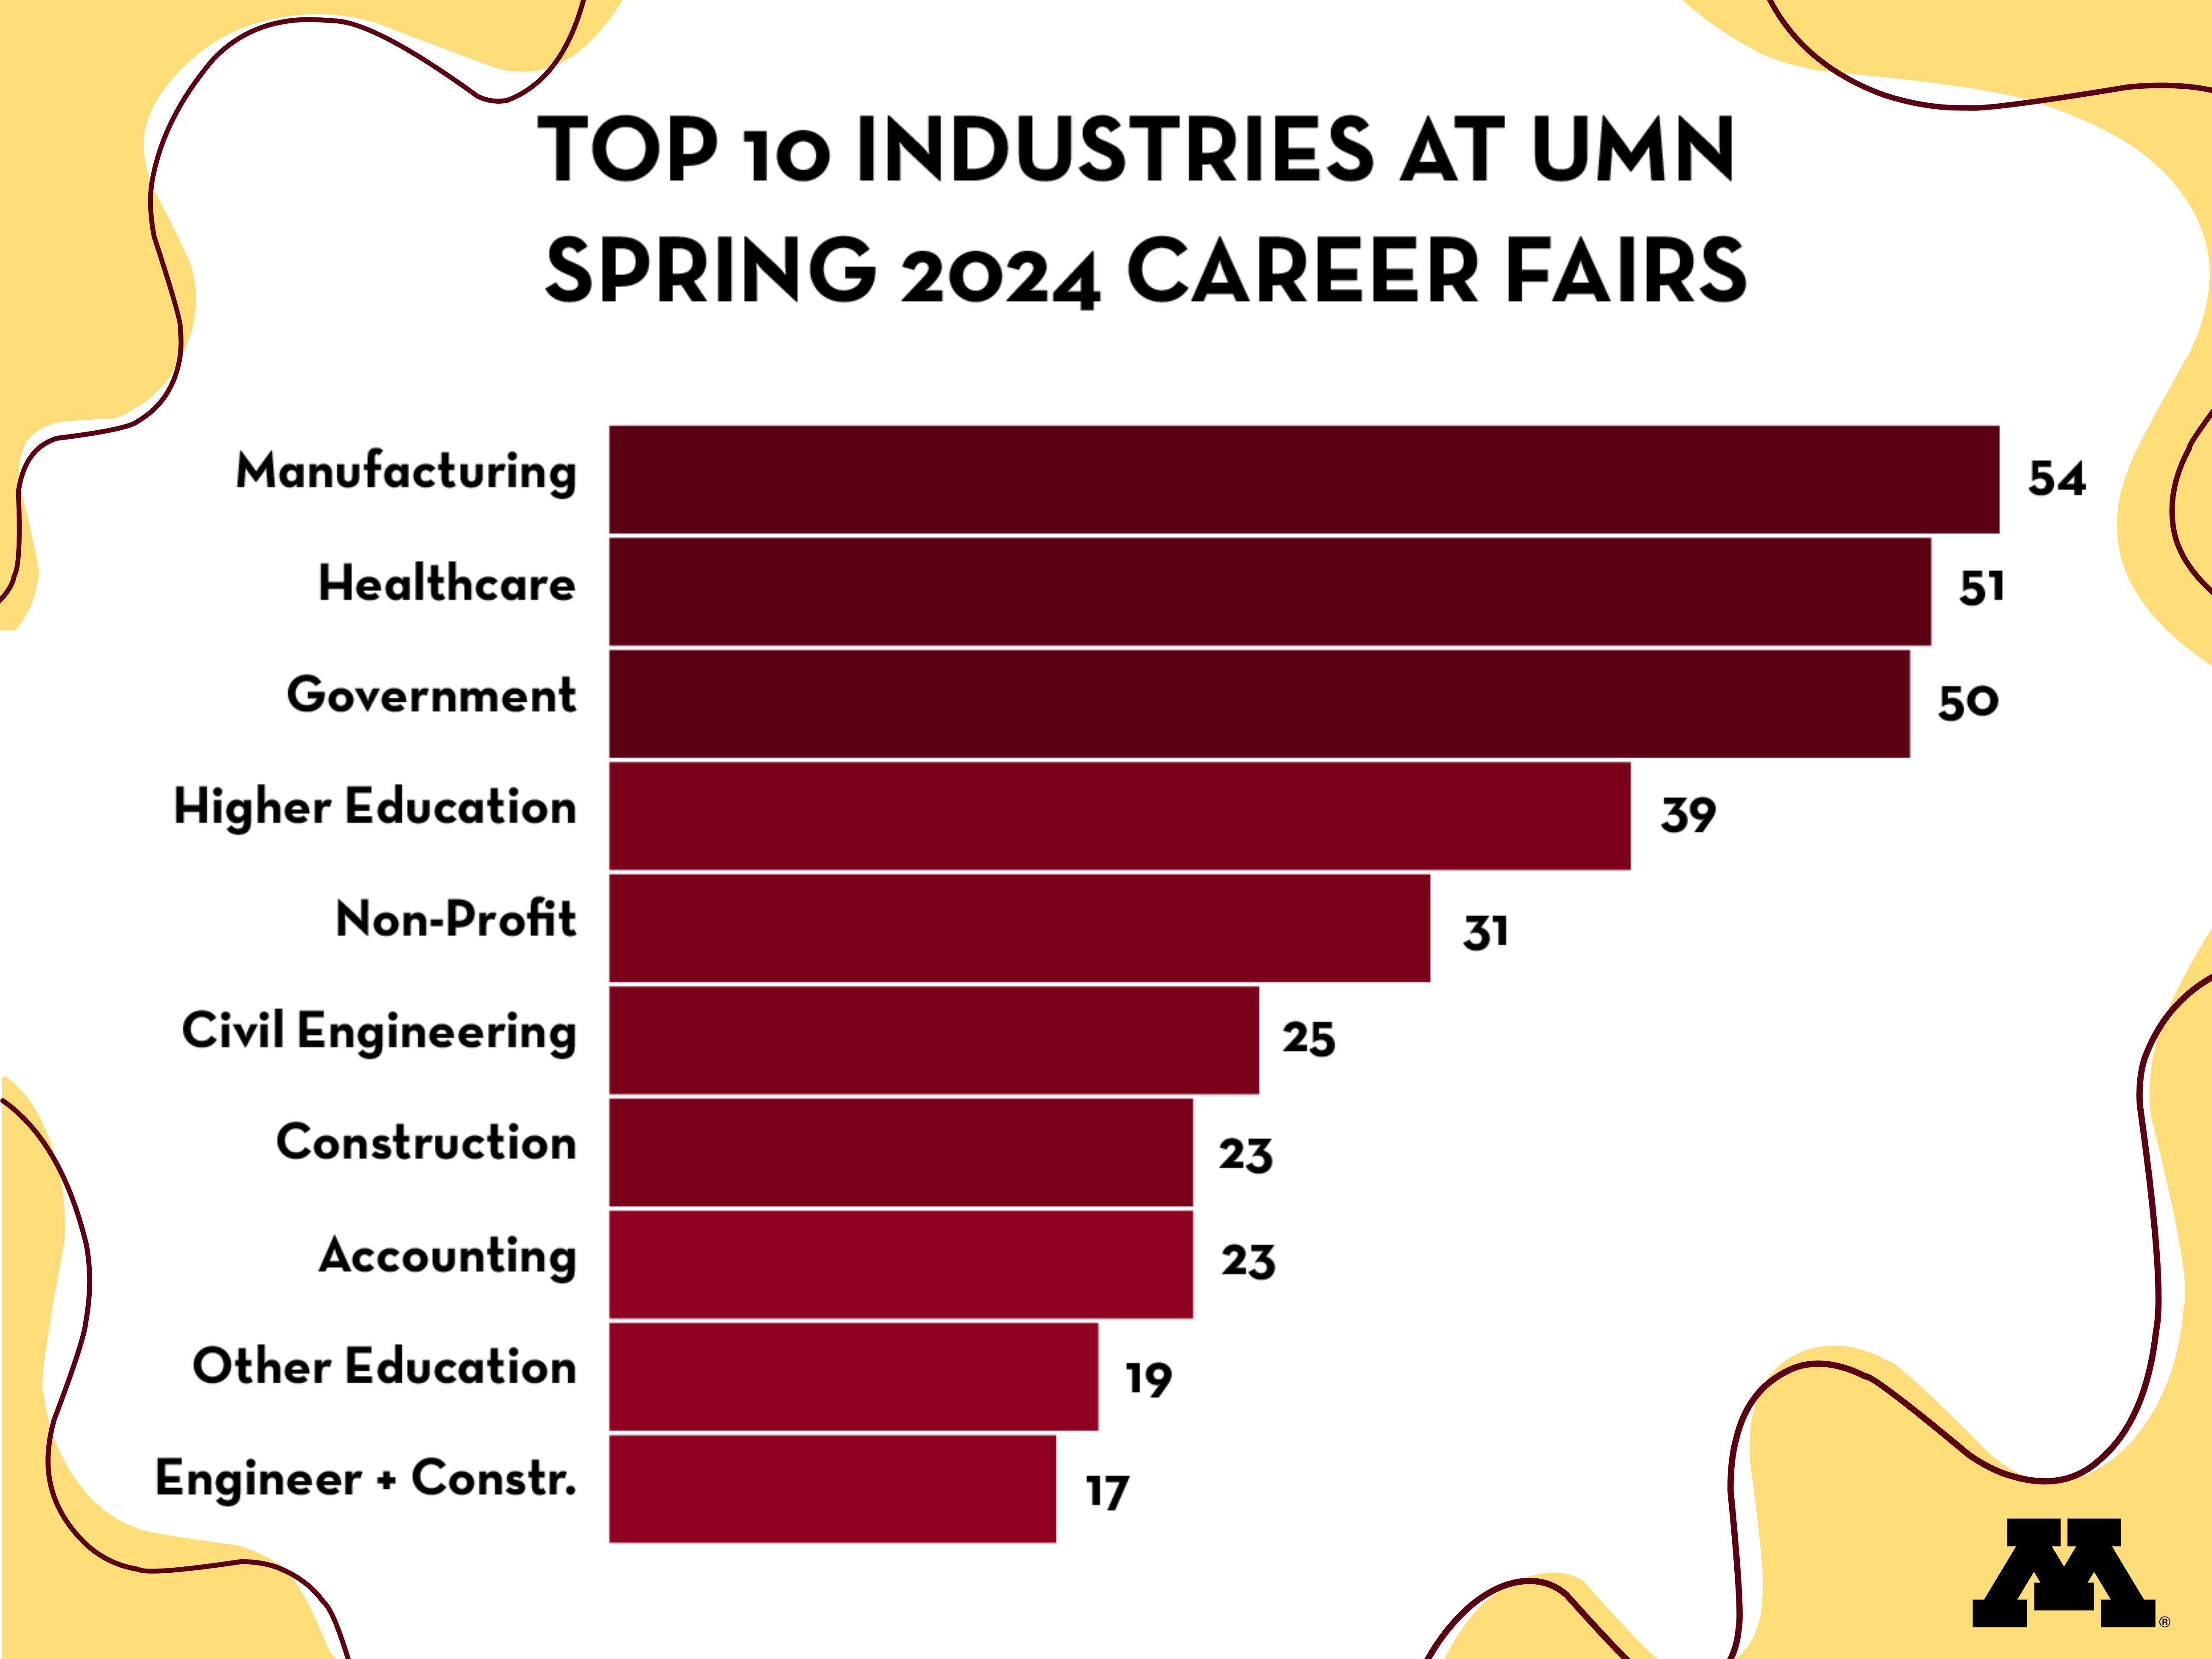 Bar chart of the top 10 industries at UMN Spring 2024 career fairs.